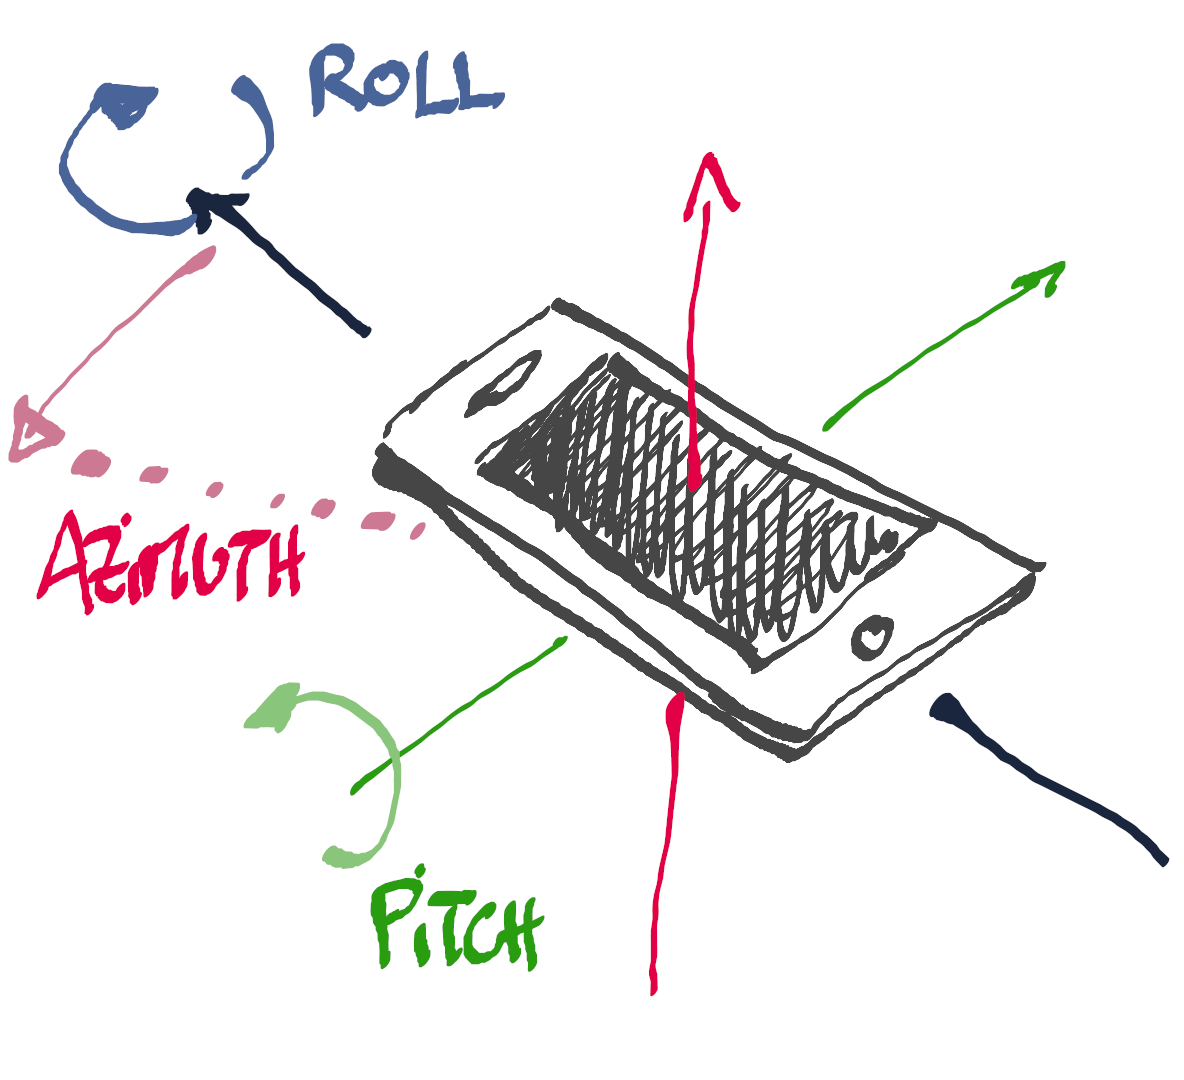 Azimuth, roll and pitch in a smartphone